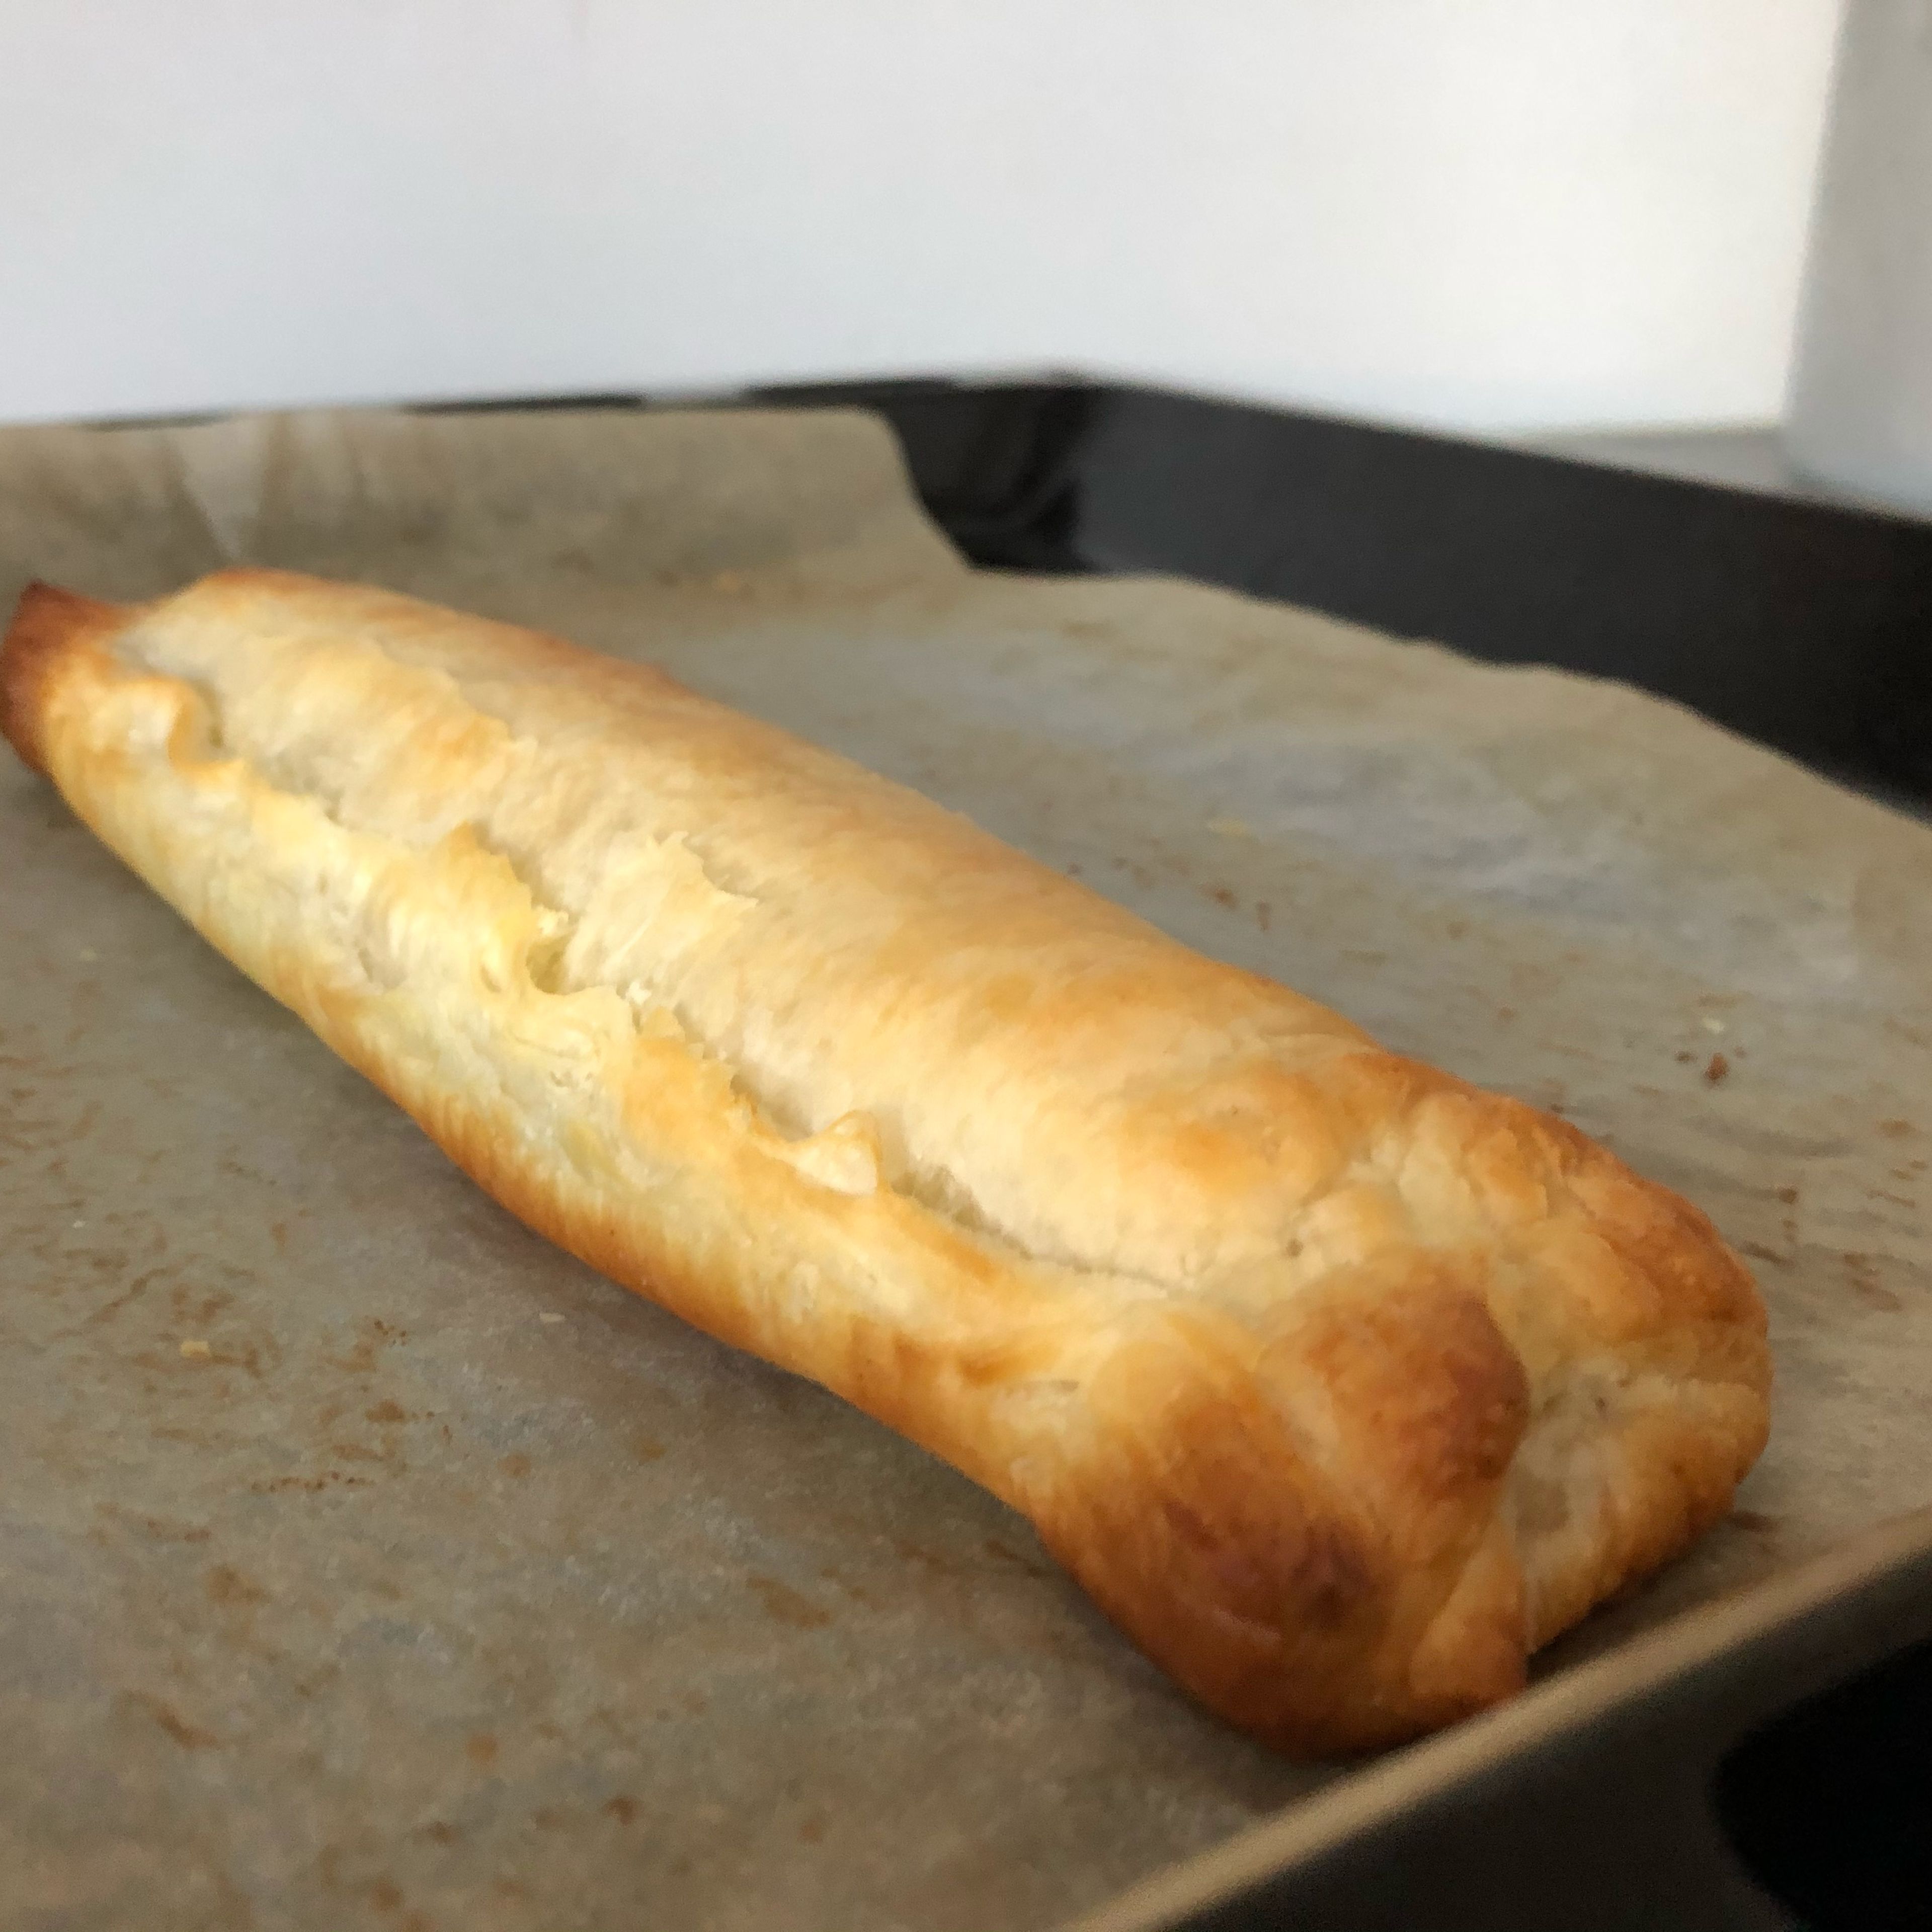 Bake it for 15 minutes at 200C